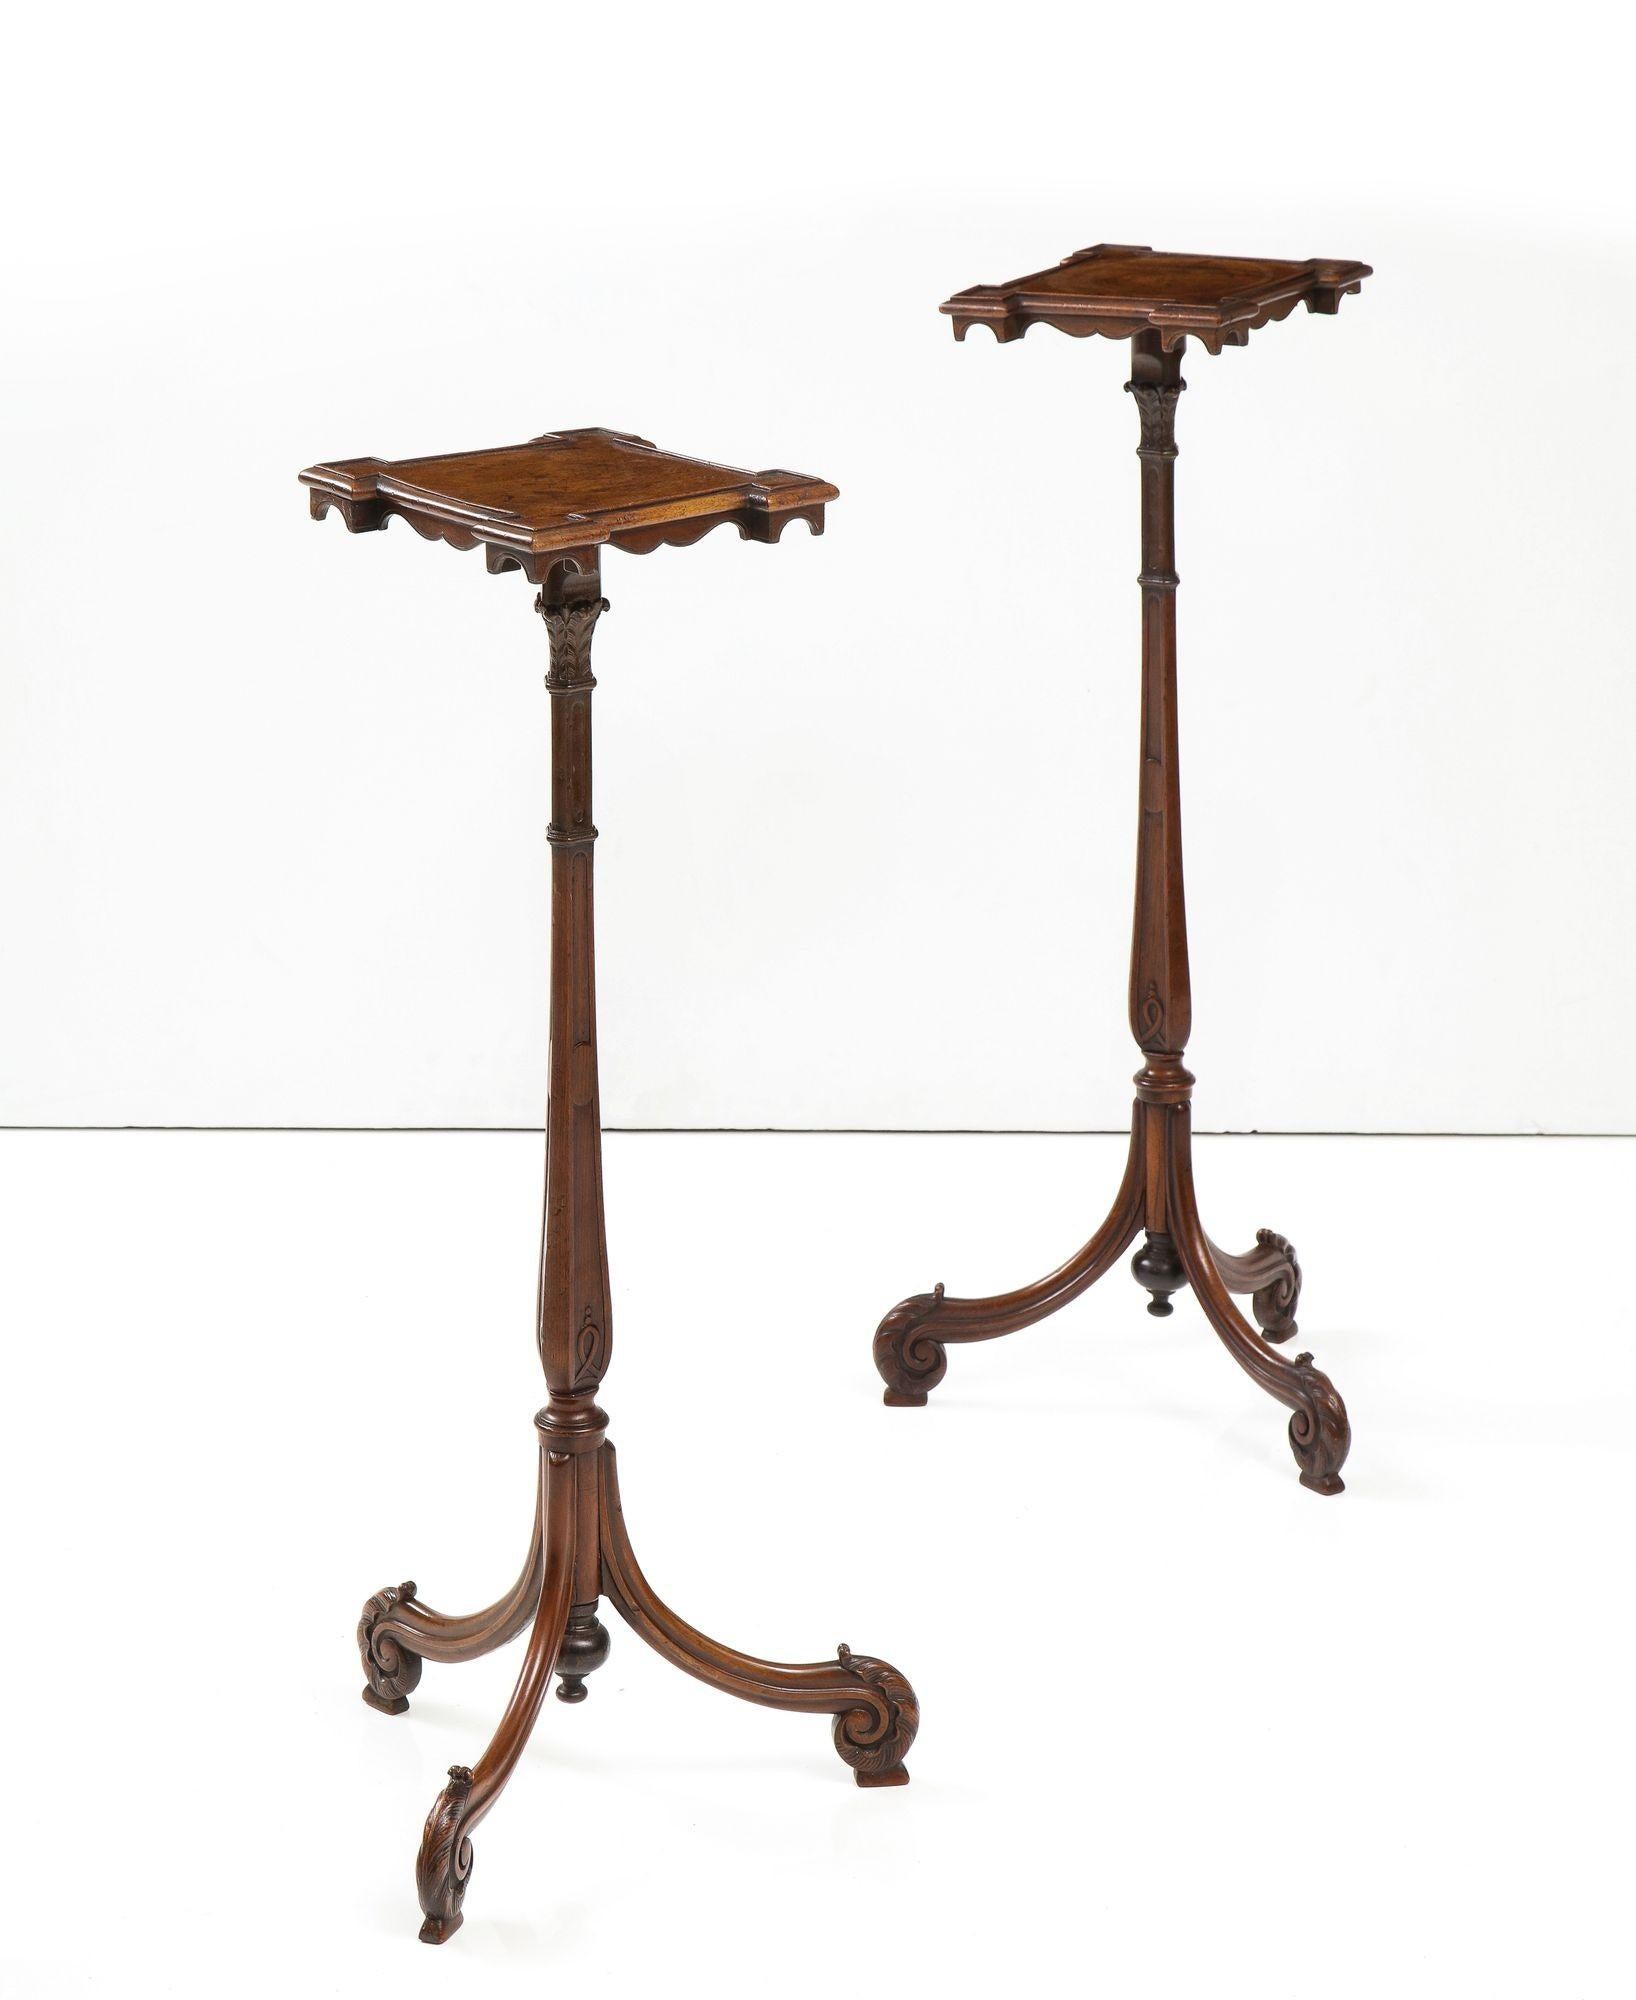 A pair of finely carved 18th century Georgian mahogany stands with quatrefoil tops and fret drops on tall, slender ringed baluster turned shafts with fiddlehead fern carved tripod bases. England, circa 1760.